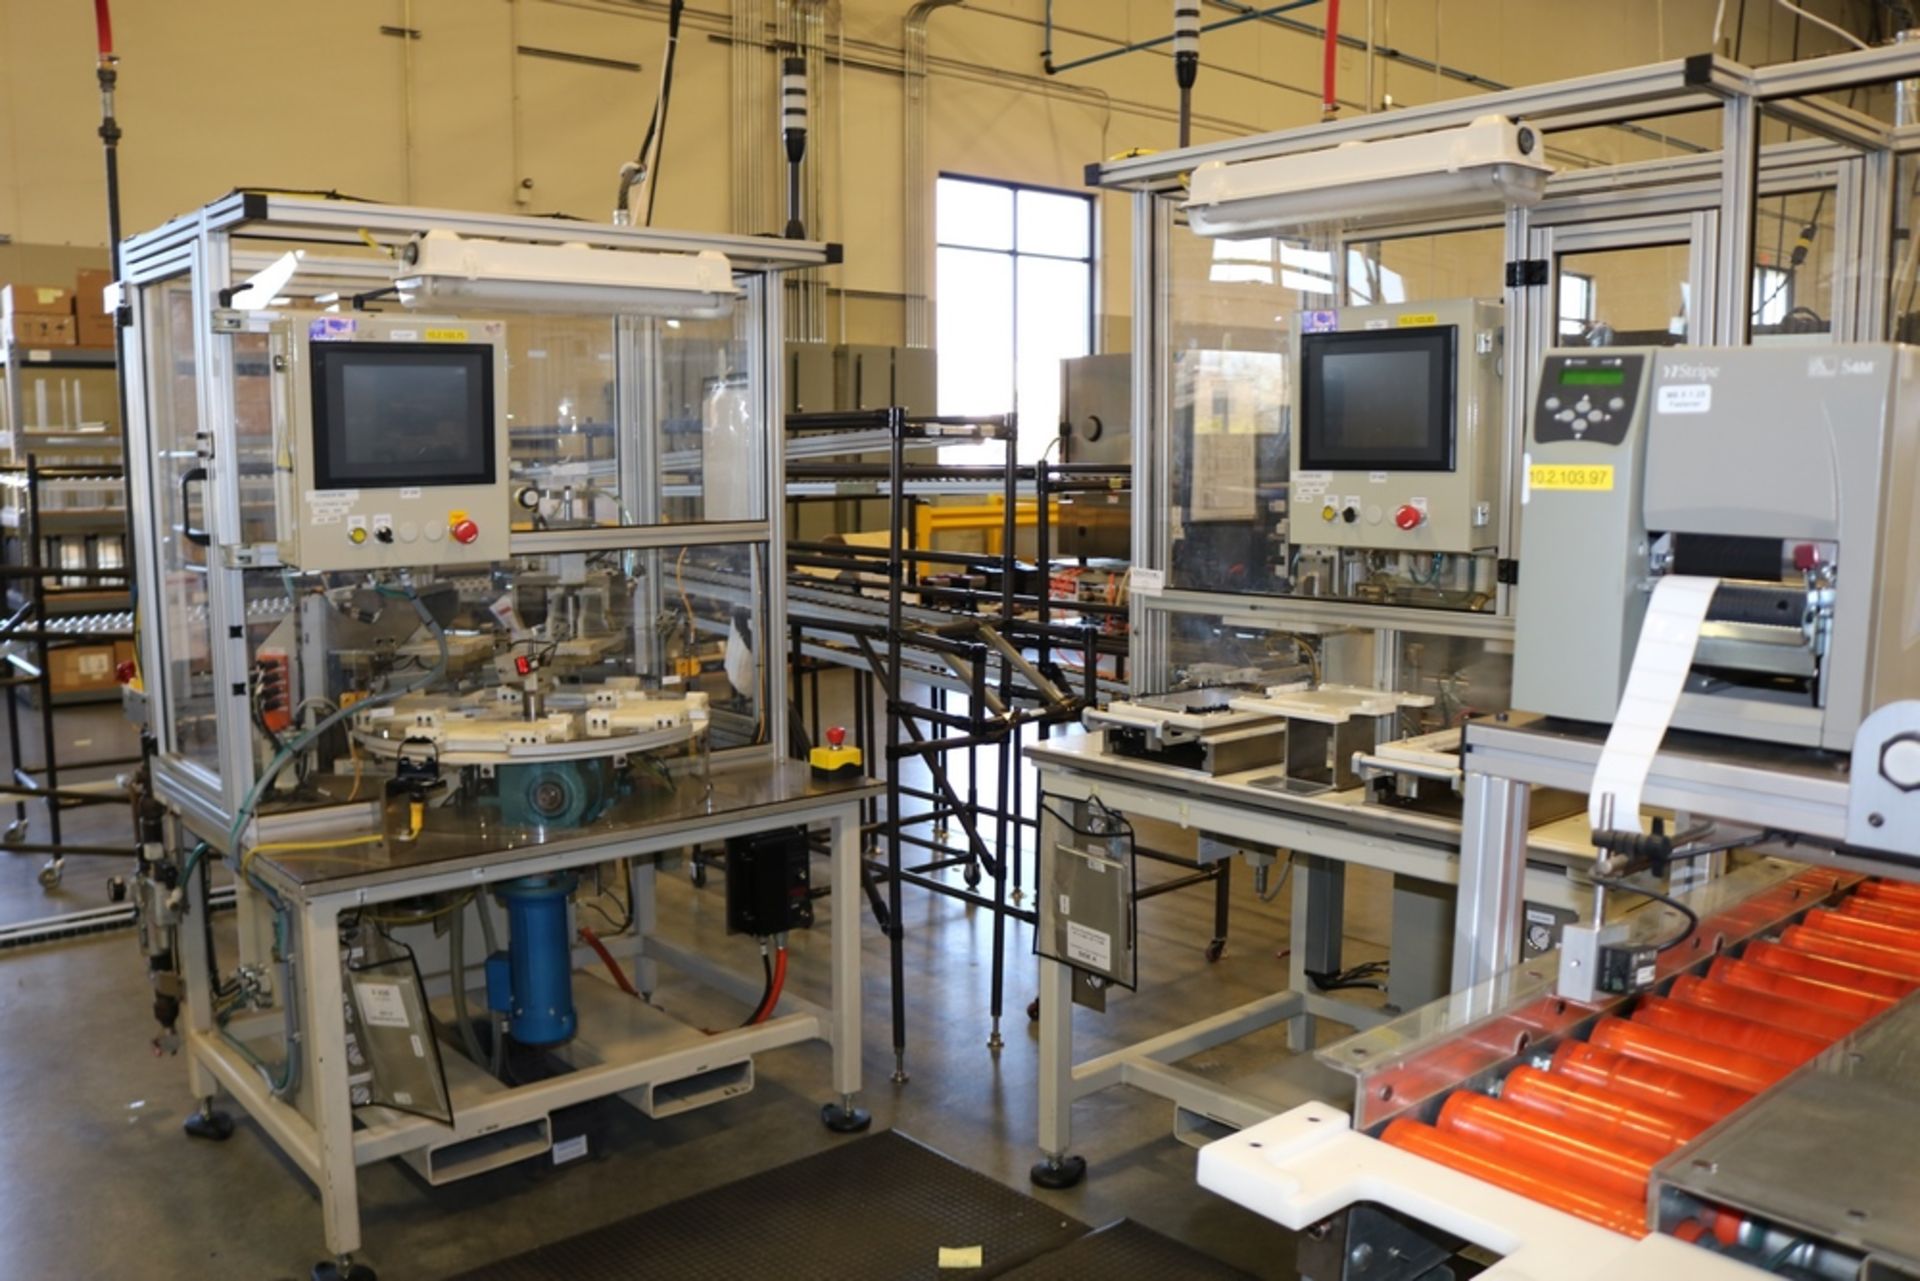 3 Station Automated Module Assembly Line Built by Pro Tech Machine for Enerdel Module Assembly - Image 25 of 48